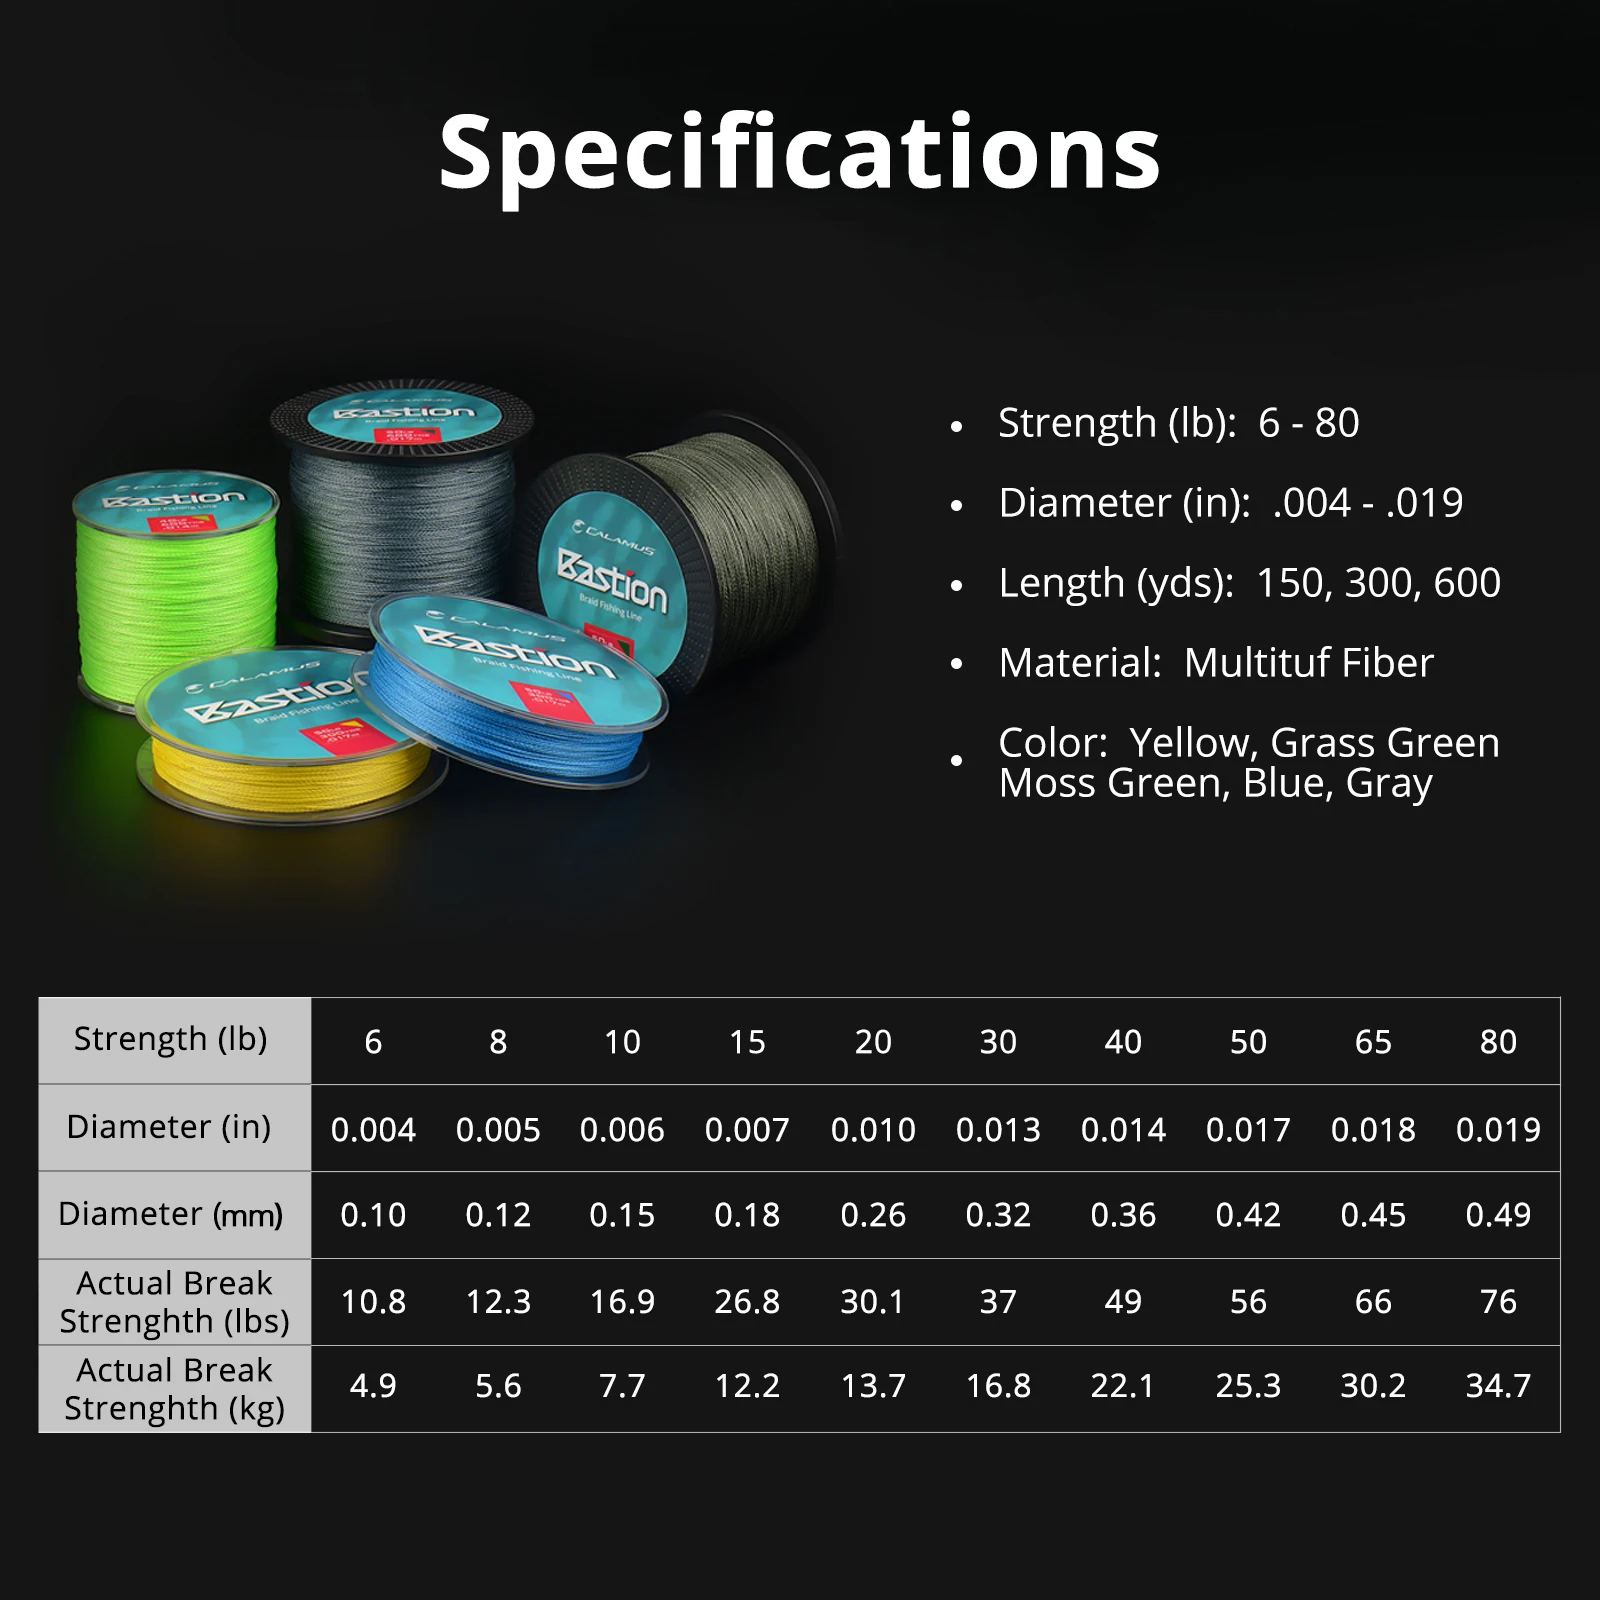 Calamus Bastion Monofilament Fishing Line Strong Abrasion Resistant Mono Line Superior Nylon Material Mono Fishing Line for Freshwater and Saltwater Fishing 